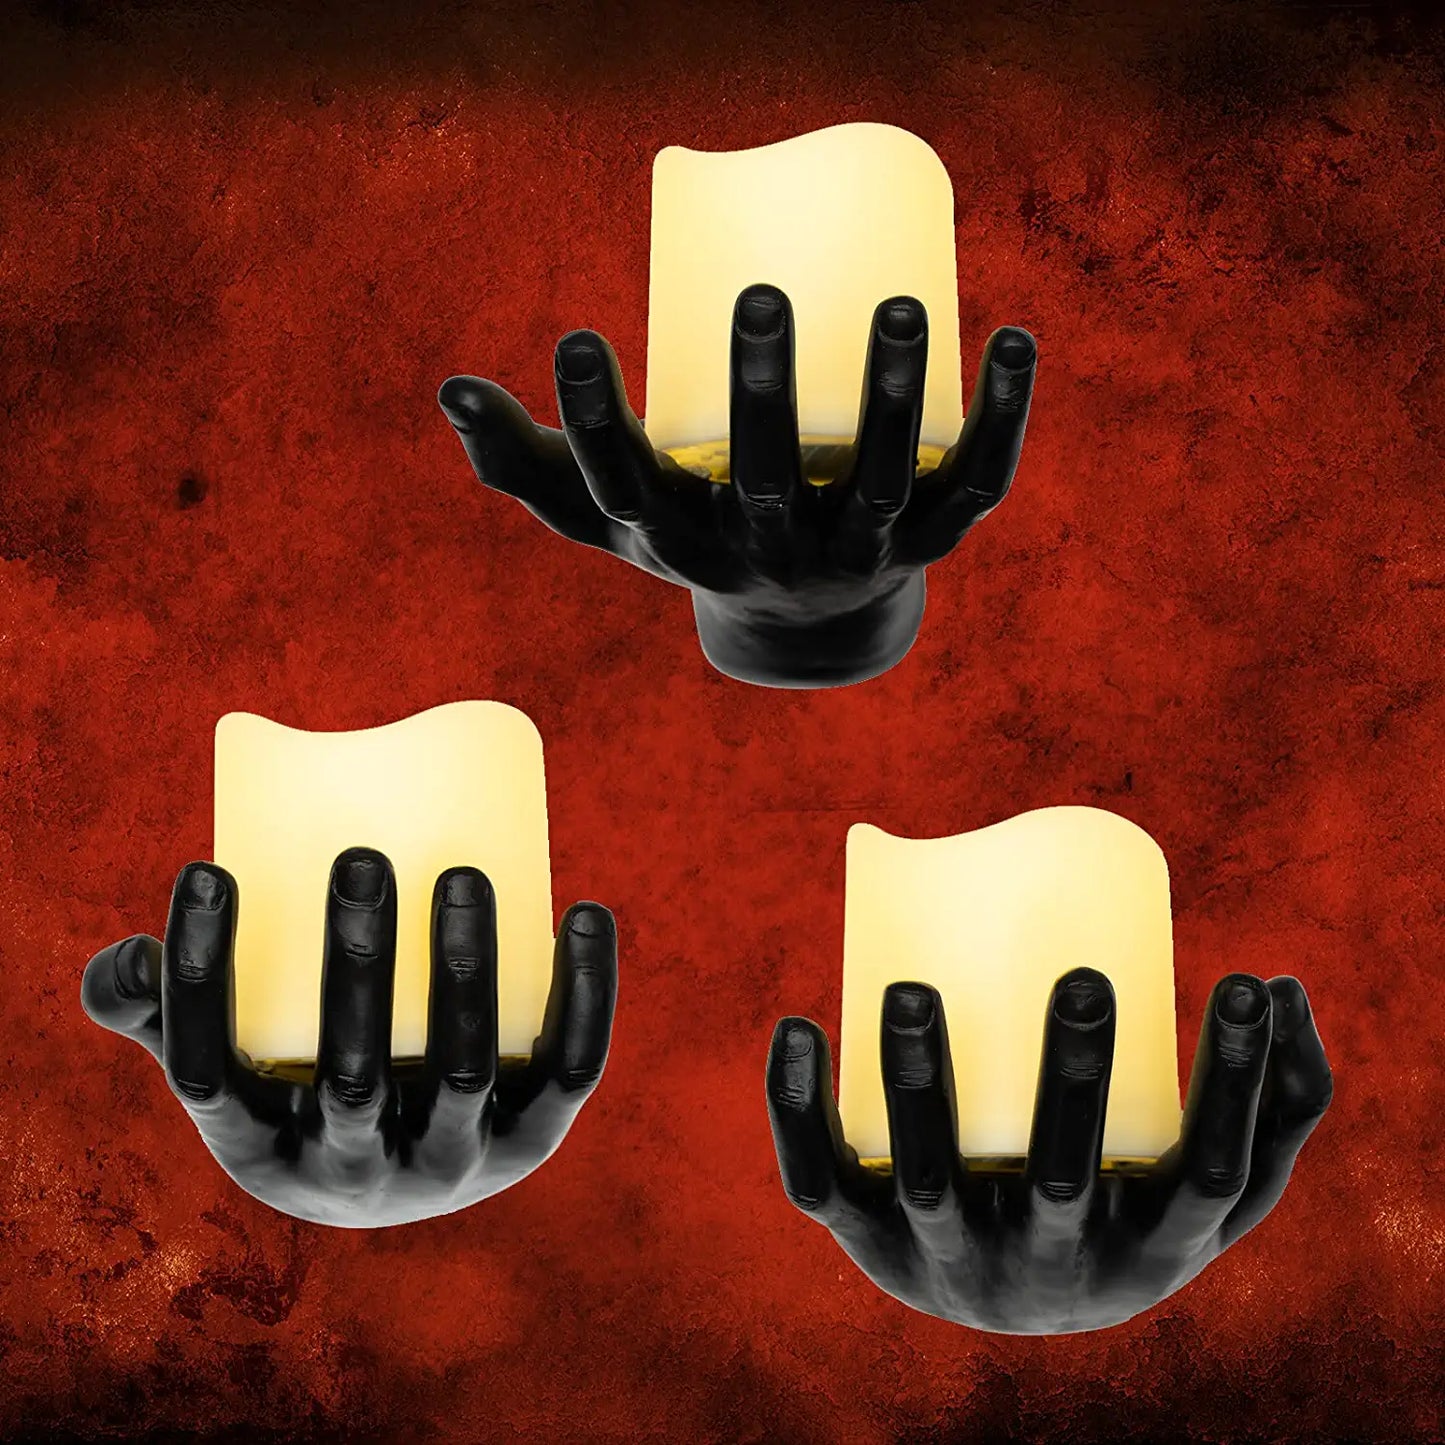 Spooky Hands Wall LED Candle Lights Decor 3 Set | Reaching Flickering Halloween Gothic Hand Home Decor Candles Included | Horror Hand Holder Hanger Art Hanging Design for Haunted House Bedroom by Gute Decor